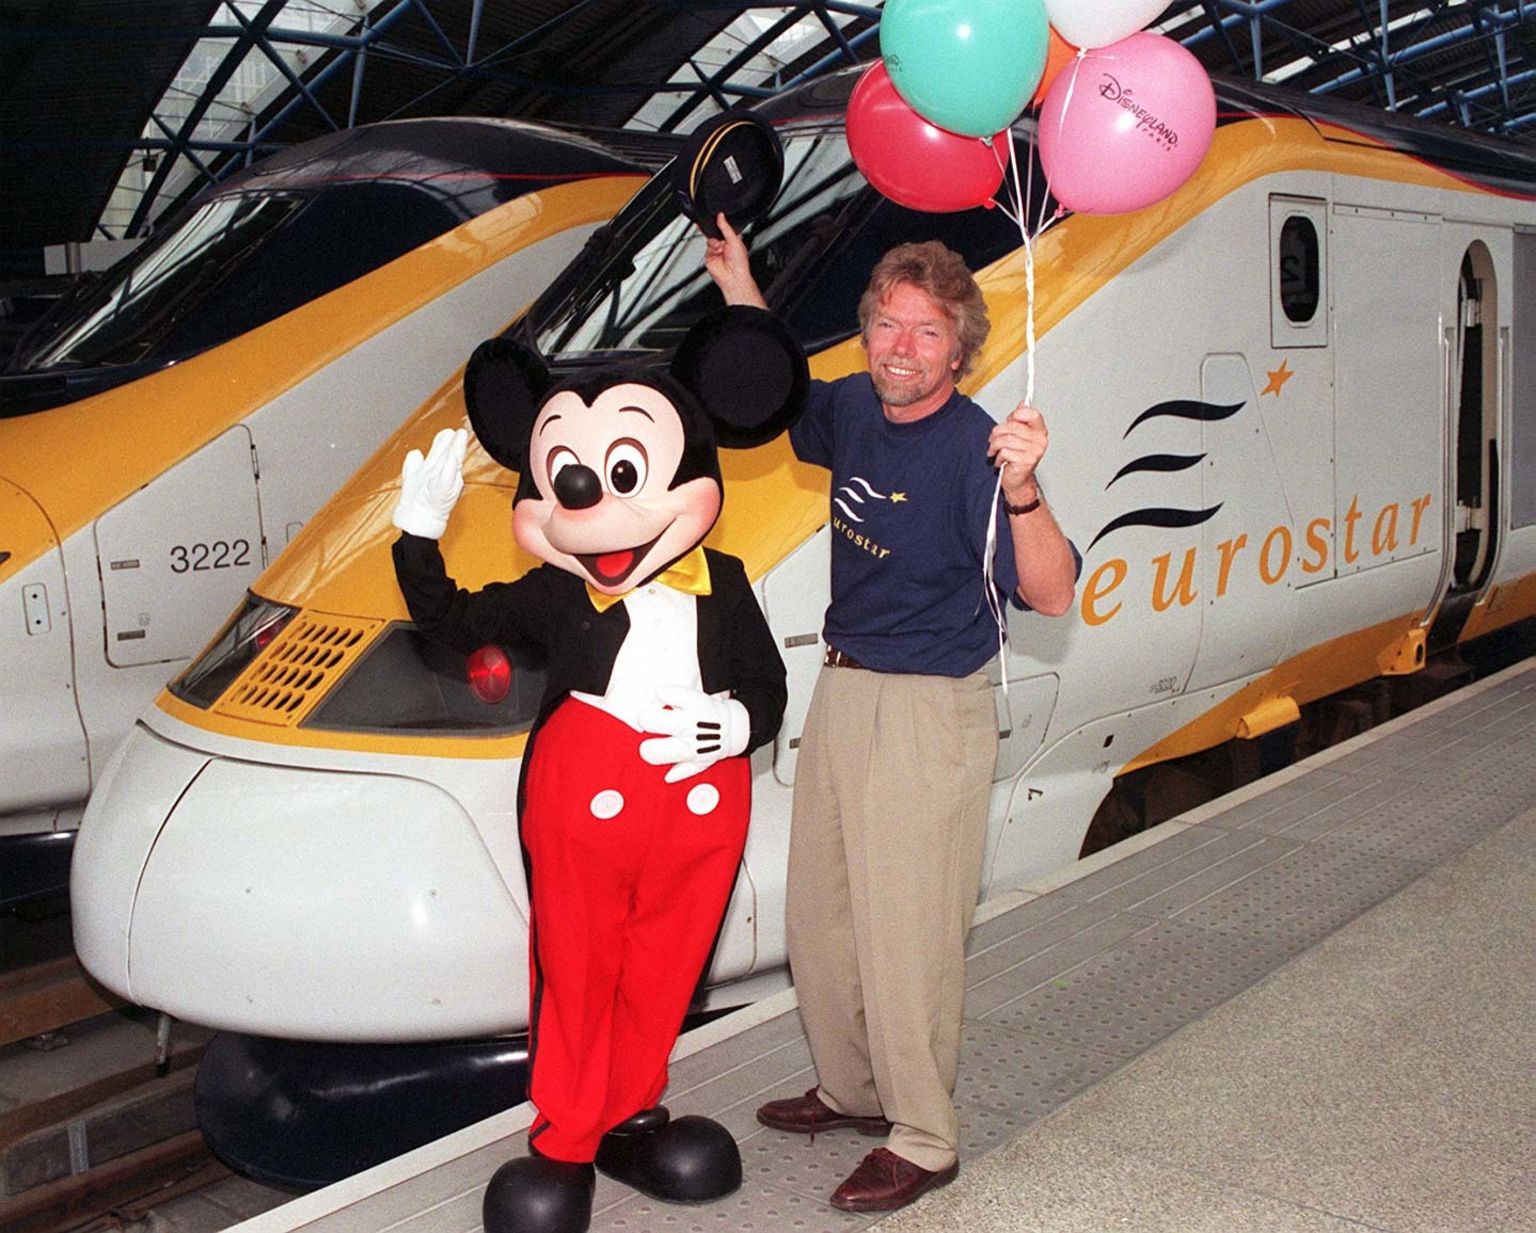 Virgin boss Richard Branson posed with Mickey Mouse